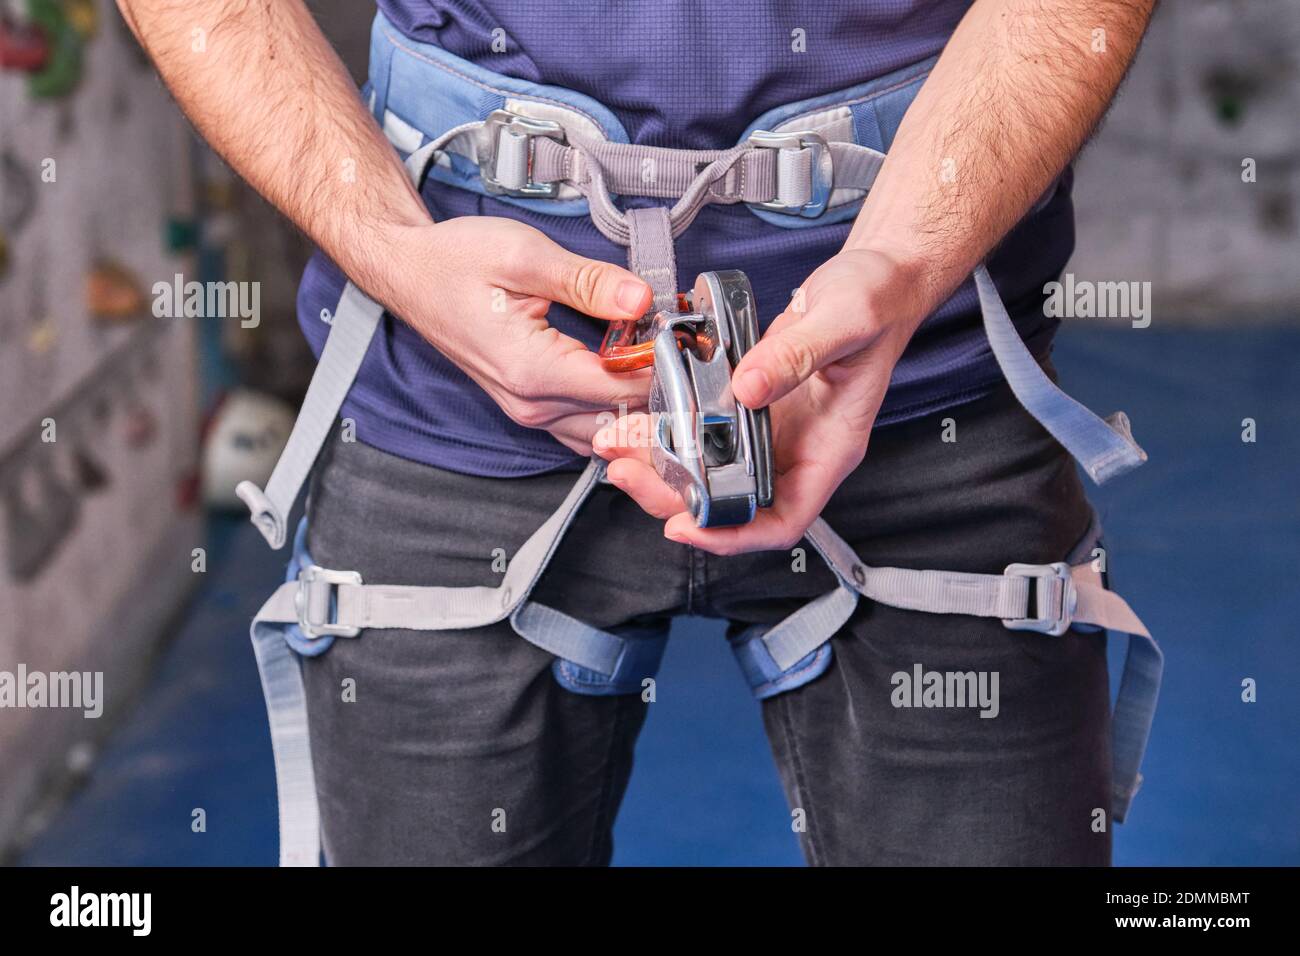 Close-up of climber with climbing equipment, tying snap hook on safety  climbing harness, preparing for climbing. Unrecognizable person detail  Stock Photo - Alamy